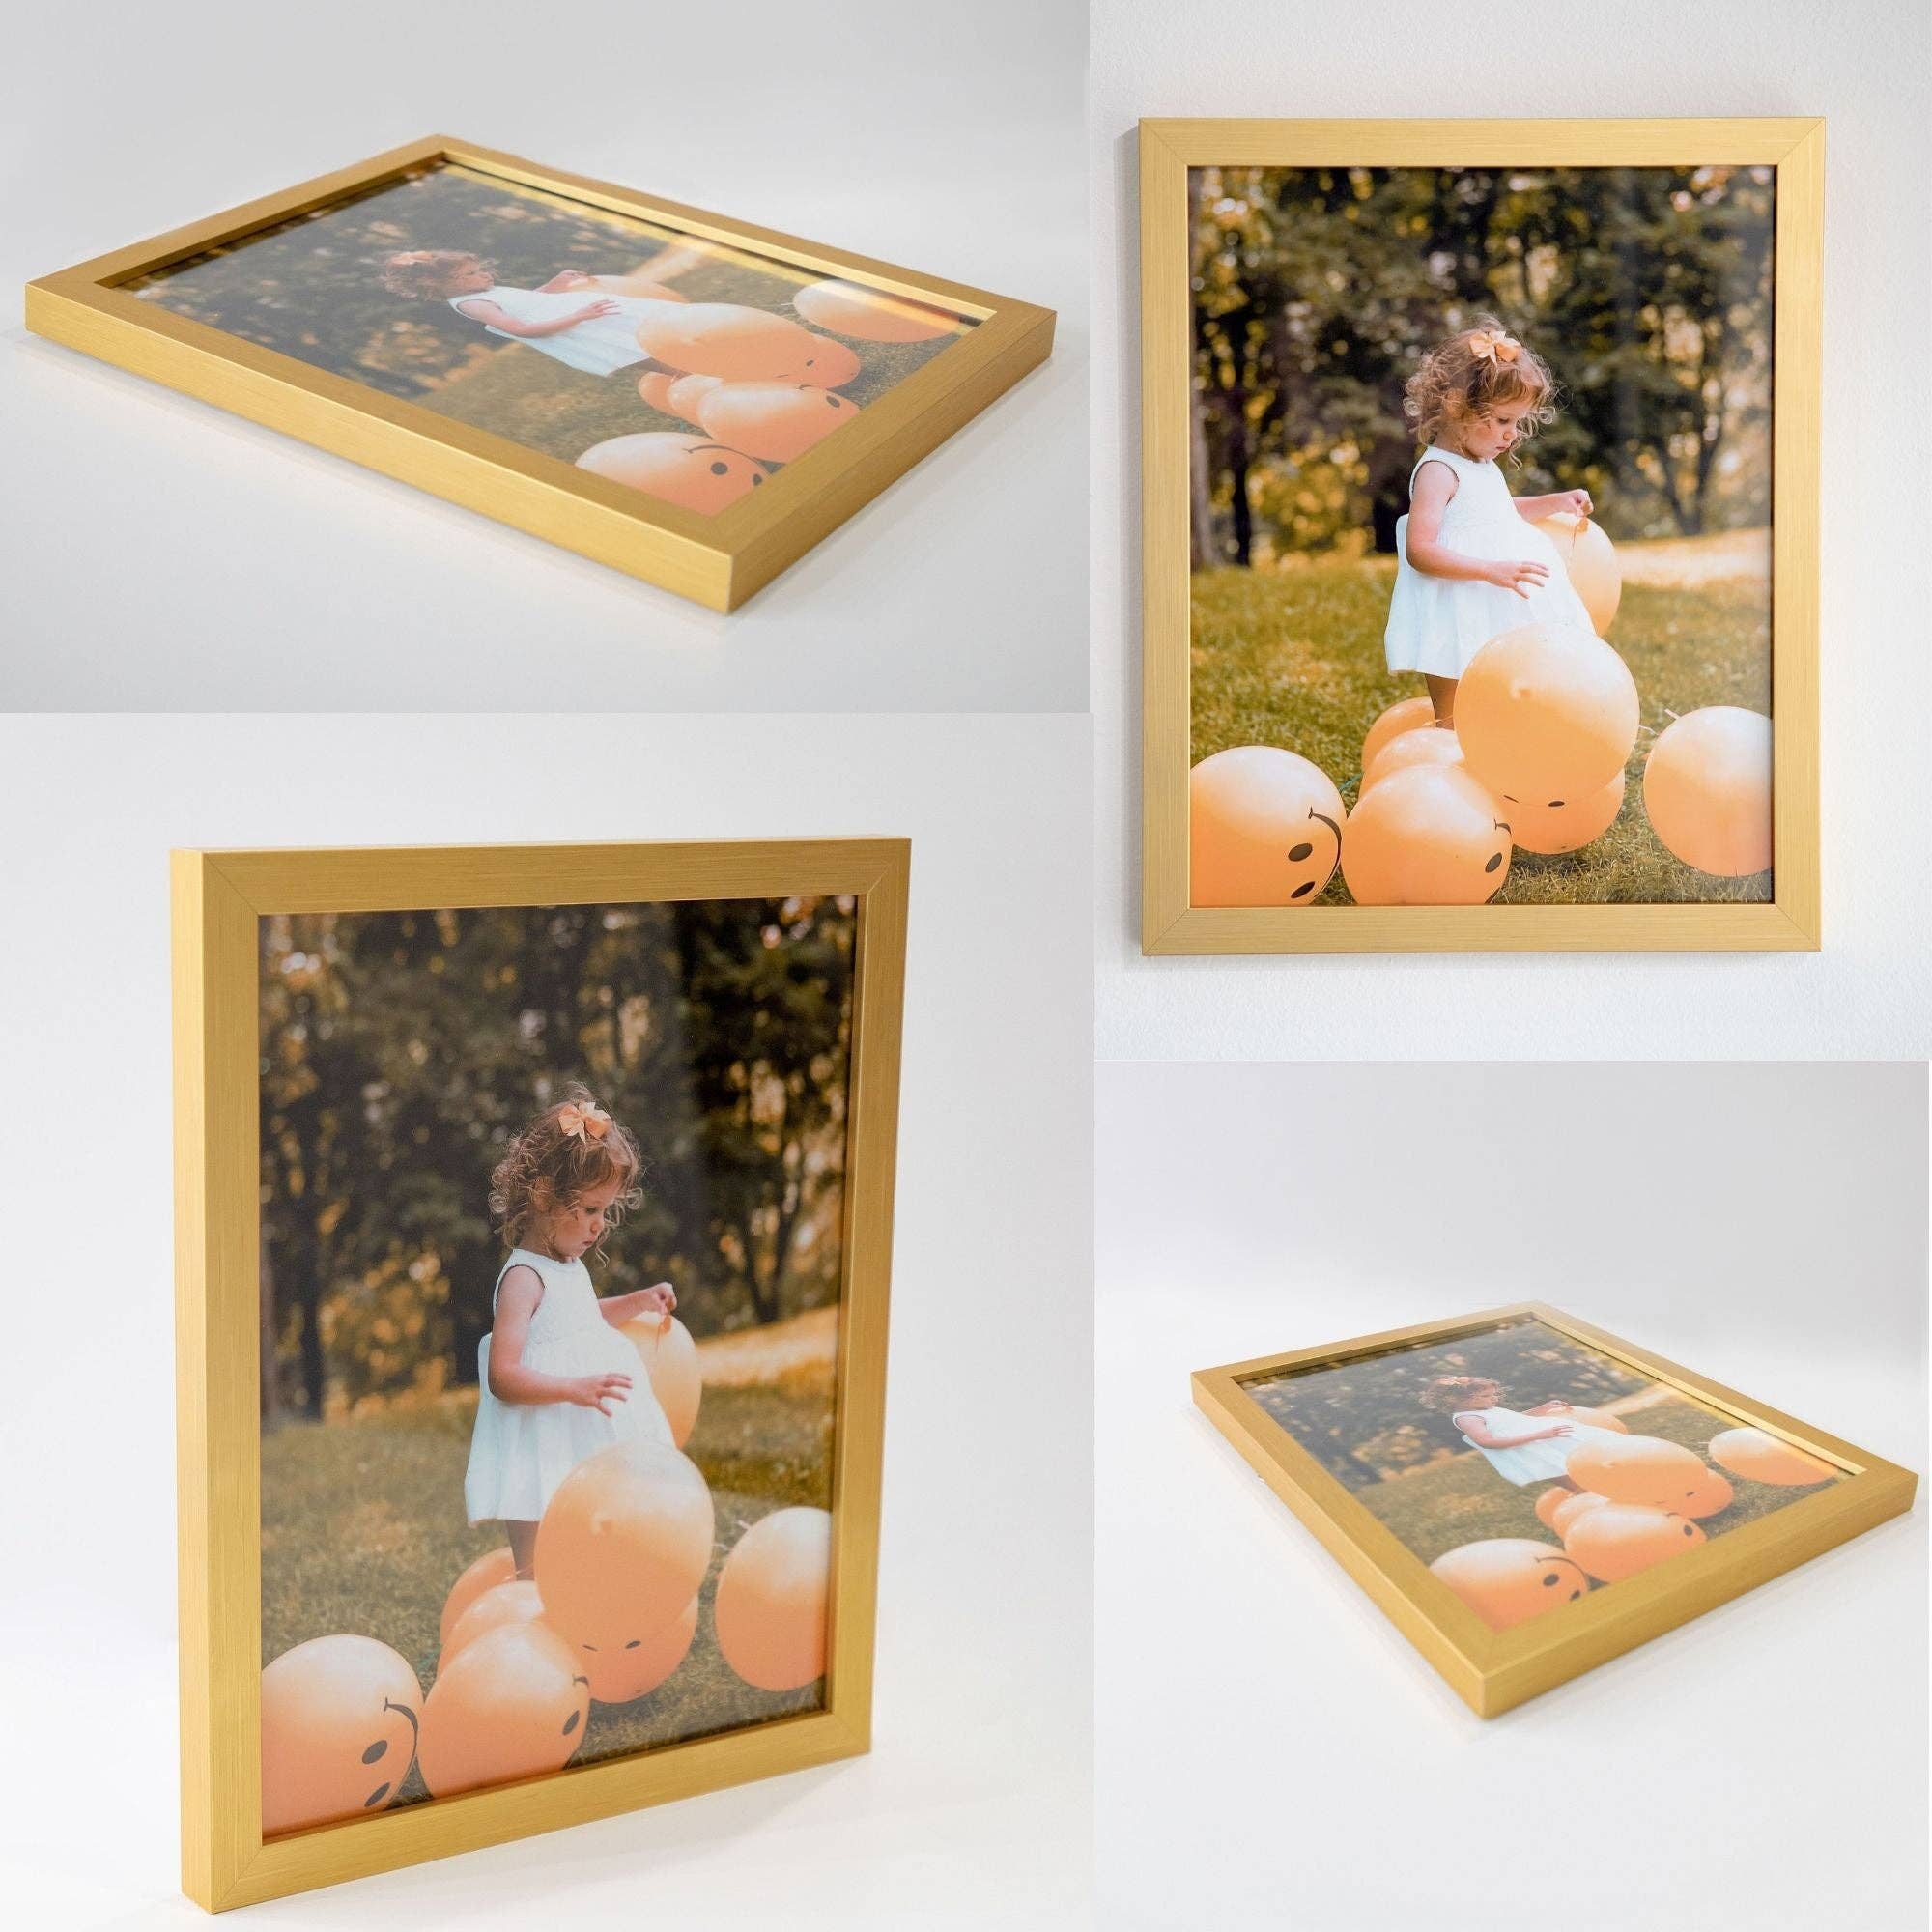 Wholesale photo frame backing board With Nice Distinctive Designs 